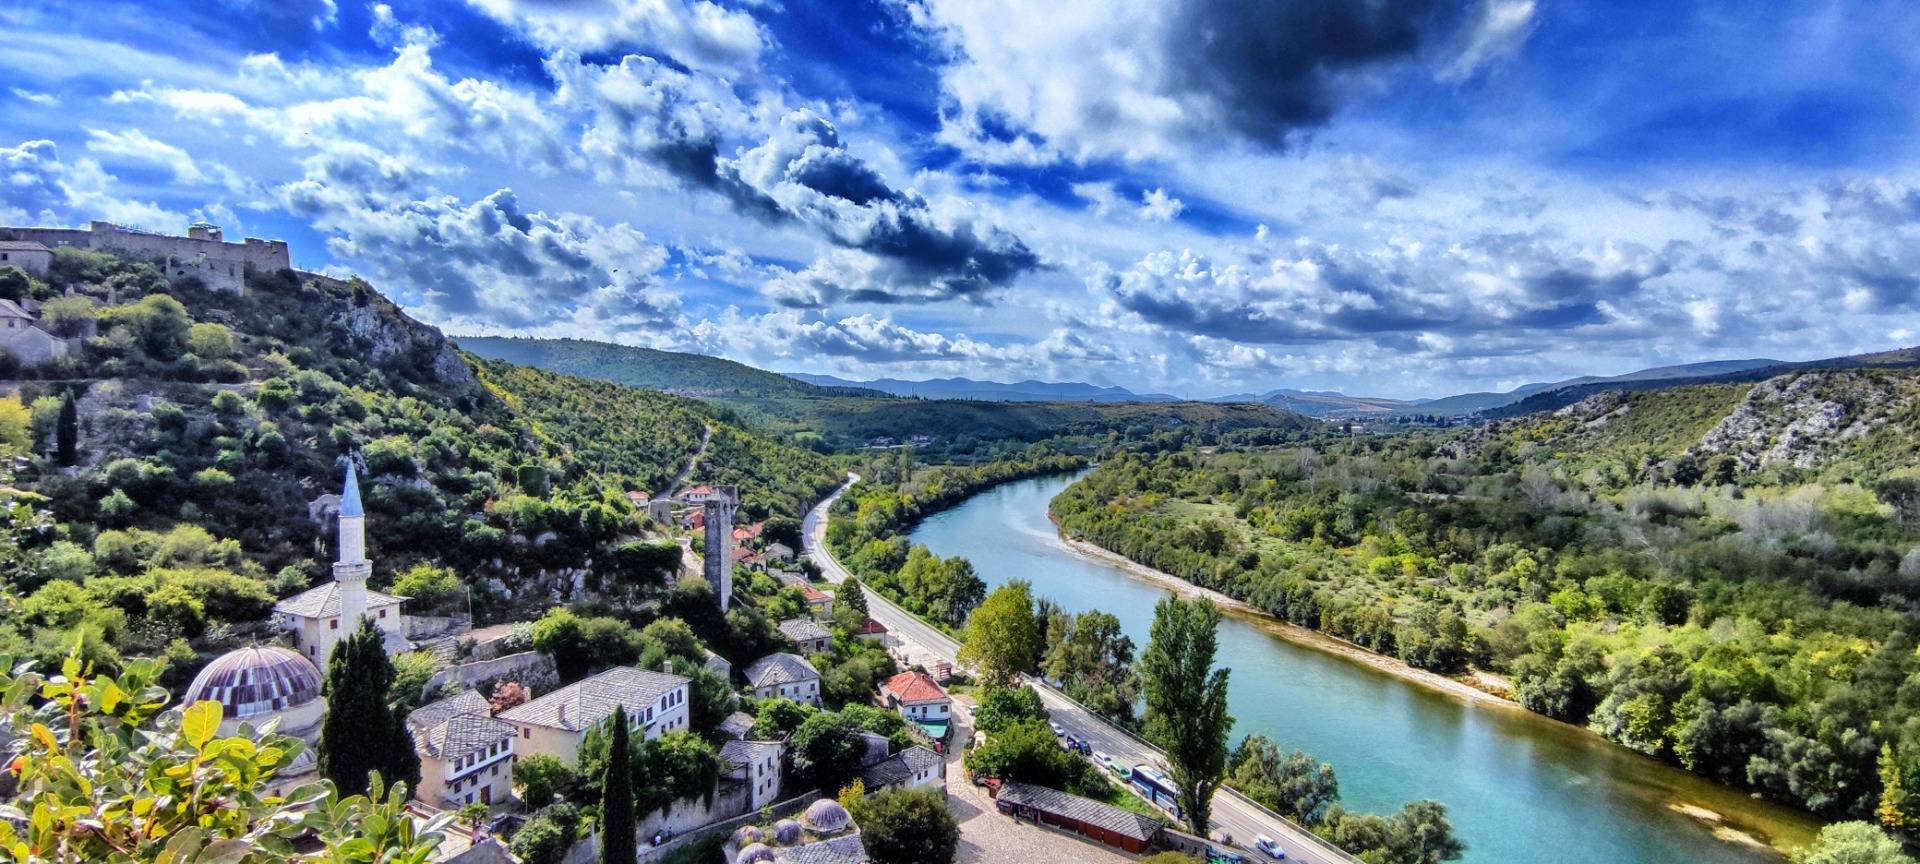 The view from the castle to Neretva river